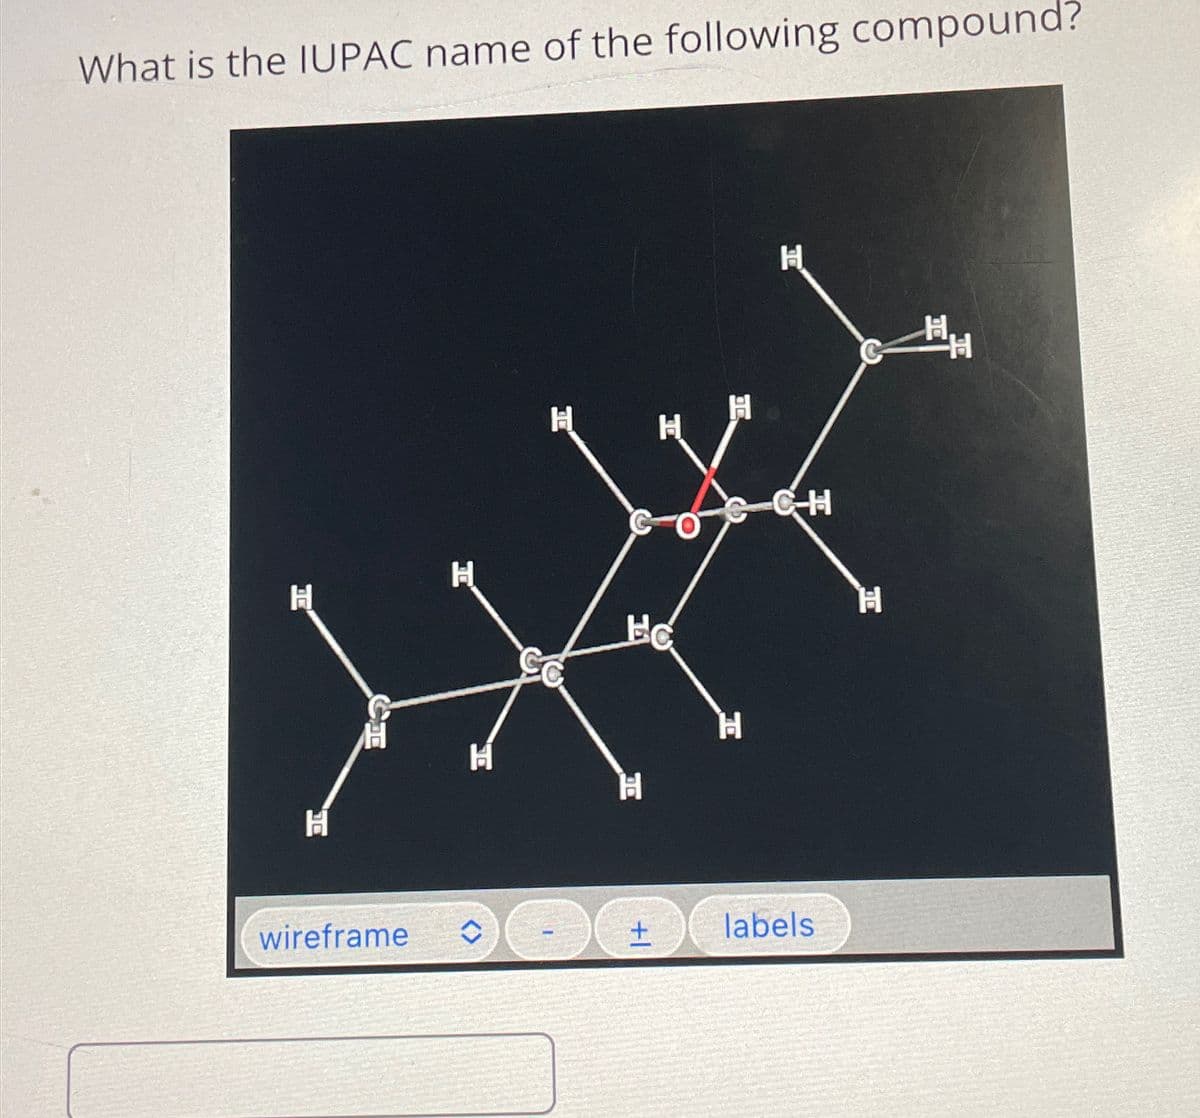 What is the IUPAC name of the following compound?
H
H
wireframe
H
H
H
54:20
THAN
La Penyay khita
HAND
ST
EC
H
H
+1
H
H
H
-C-H
labels
H
H